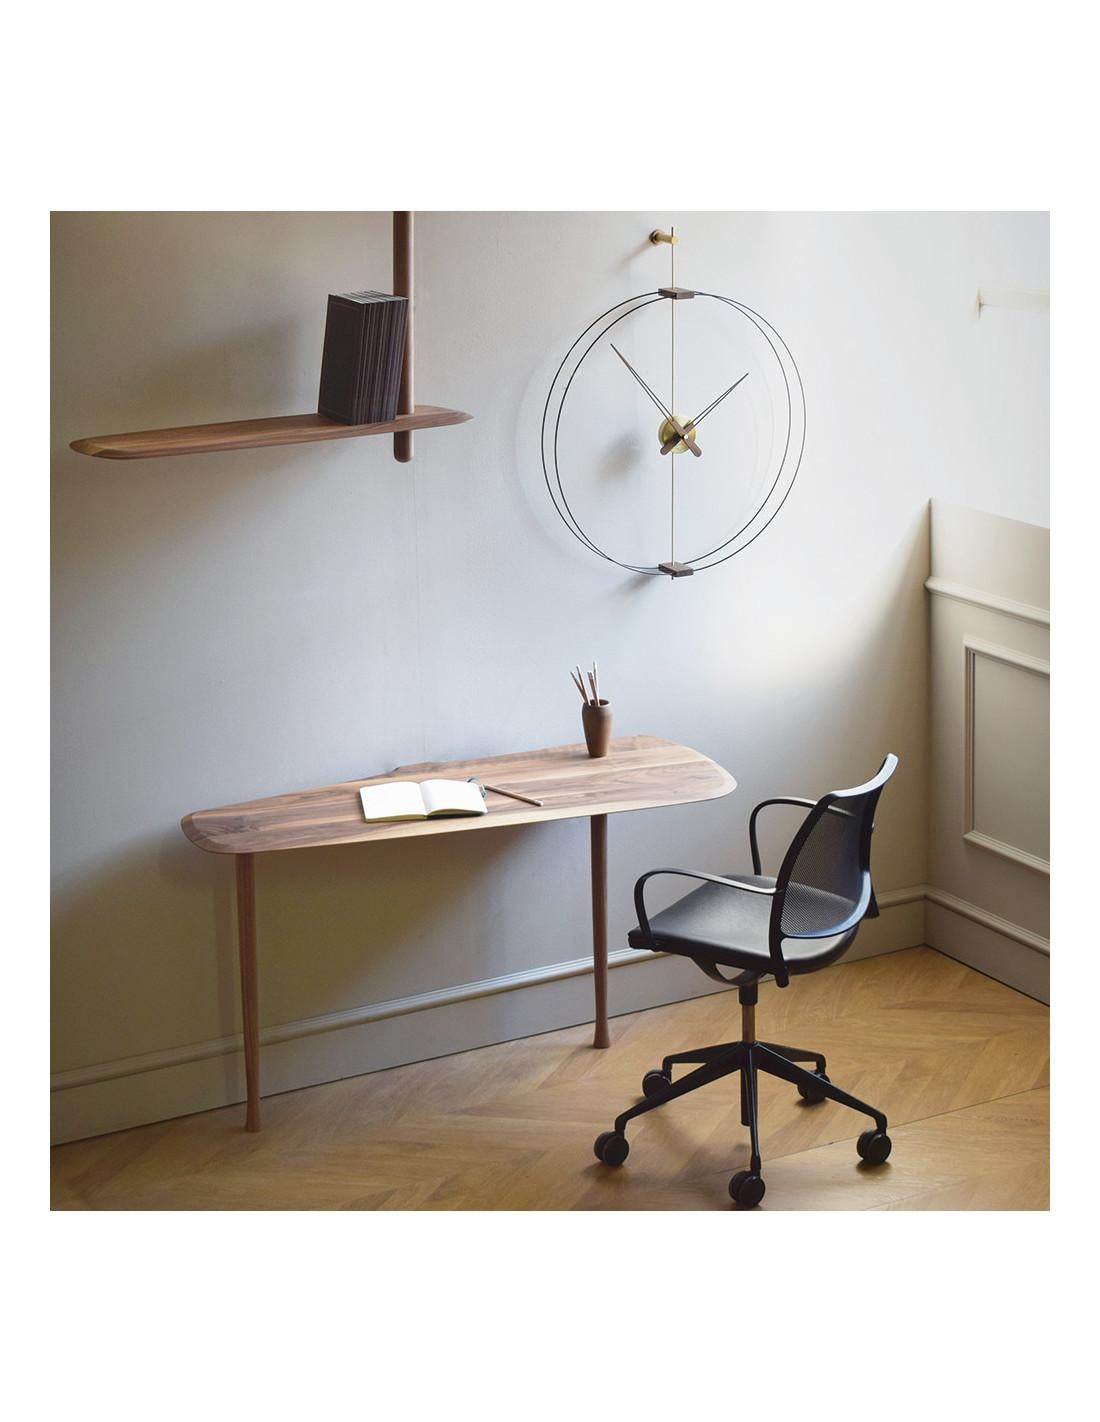 The Mini Barcelona G Clock by is the small-sized version perfect for placing on walls where the total prominence of the clock is not sought but only to add a touch of style and decoration to the space without overloading.
Mini Barcelona G Clock :